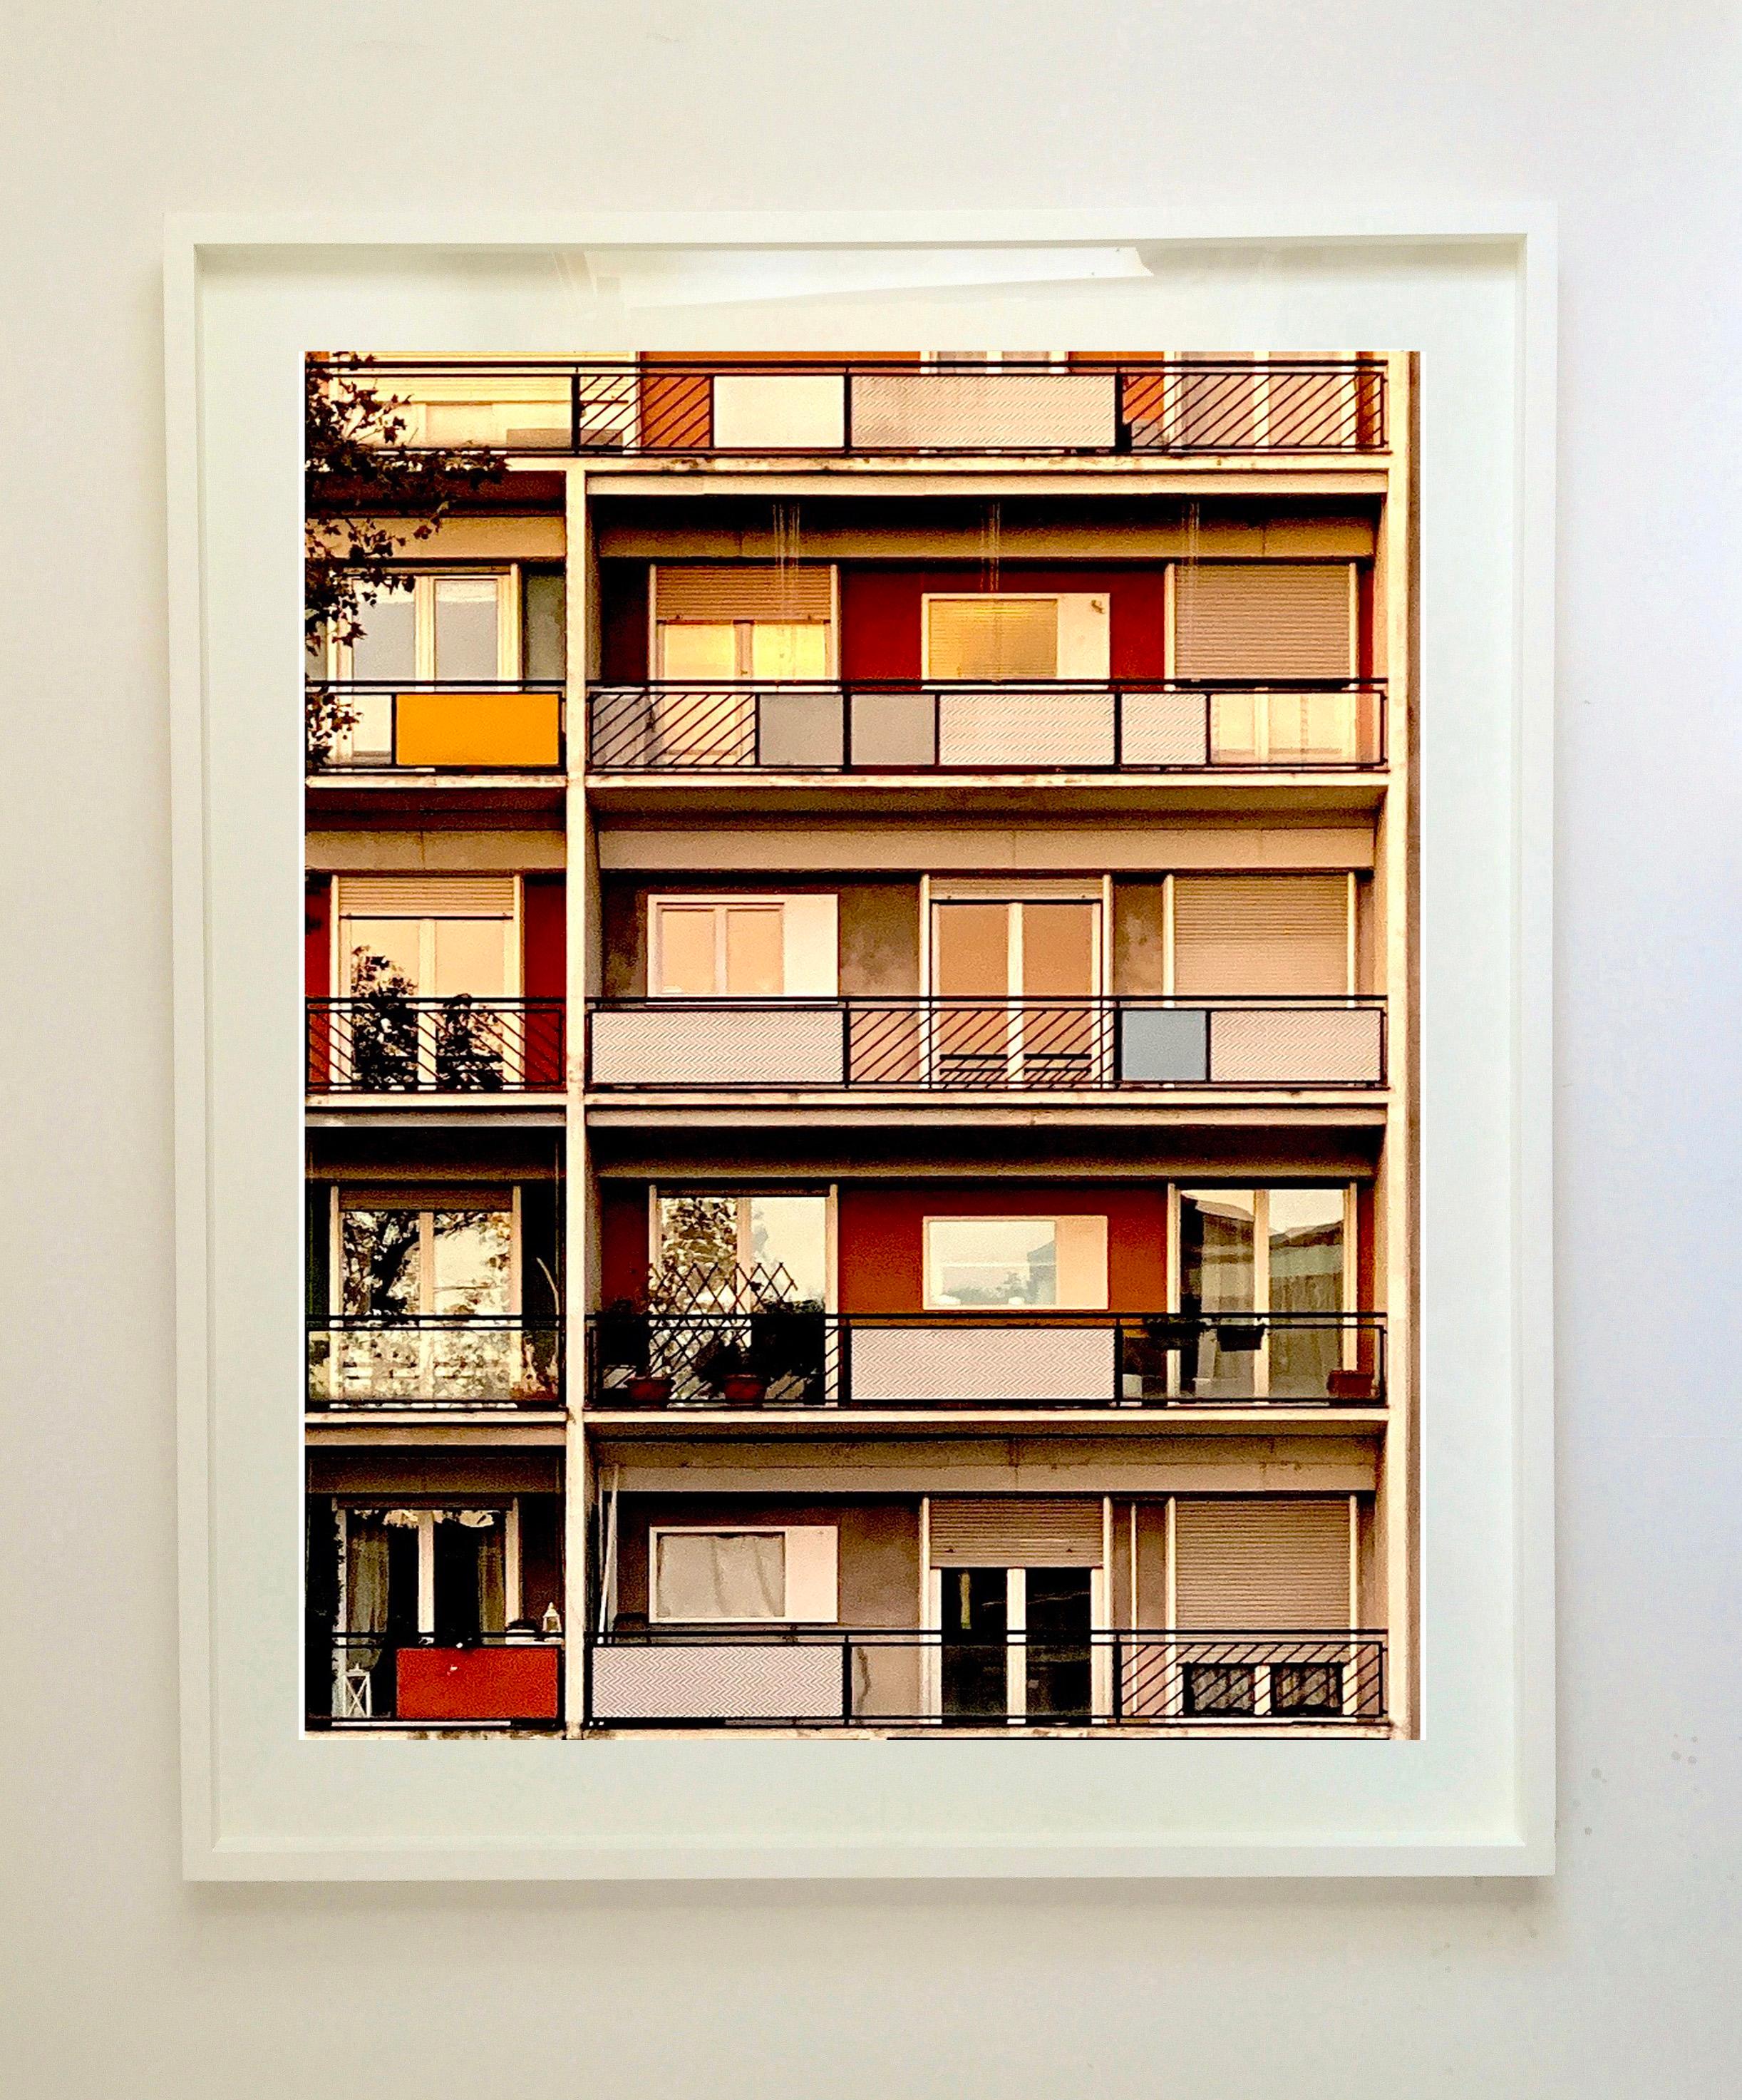 49 Via Dezza at Sunset, Milan - Conceptual Architectural Color Photography - Contemporary Print by Richard Heeps